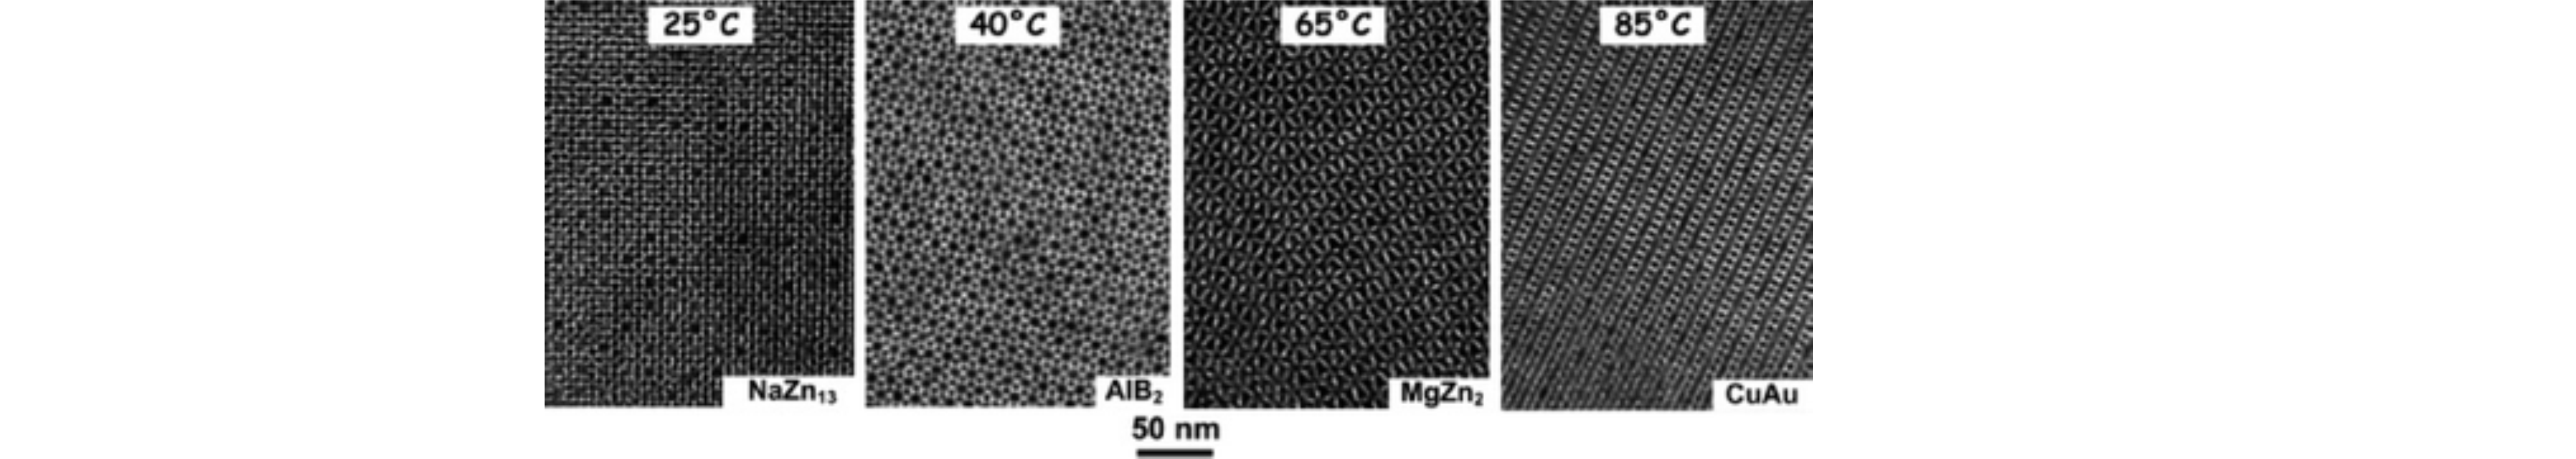 Energetic and Entropic Contributions to Self-Assembly of Binary Nanocrystal Superlattices: Temperature as the Structure-Directing Factor